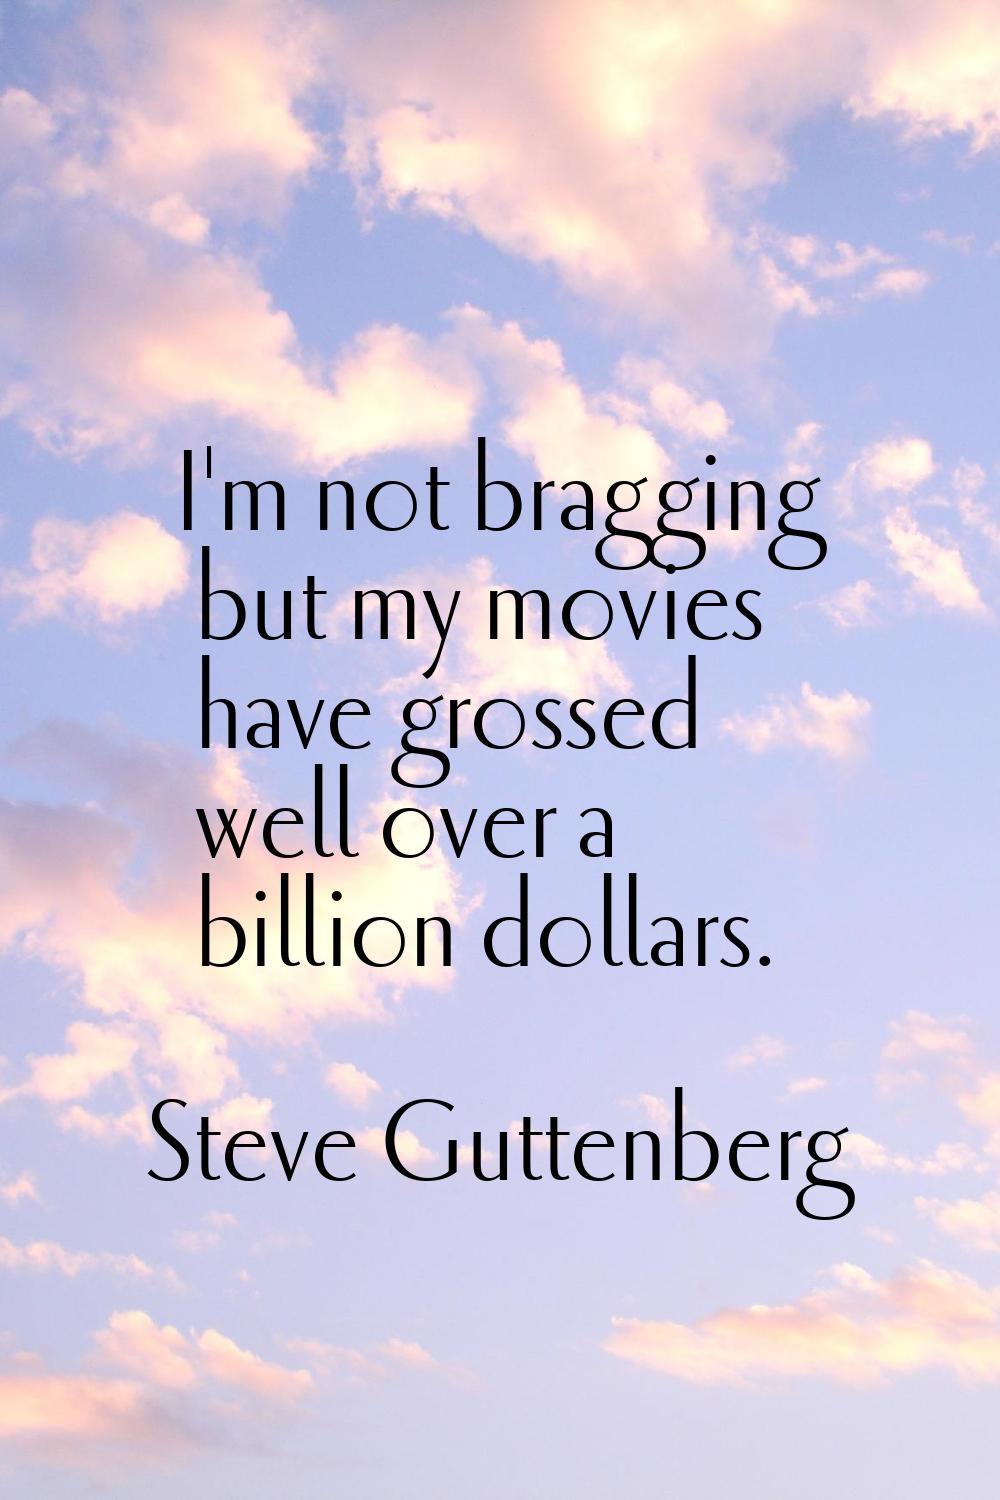 I'm not bragging but my movies have grossed well over a billion dollars.